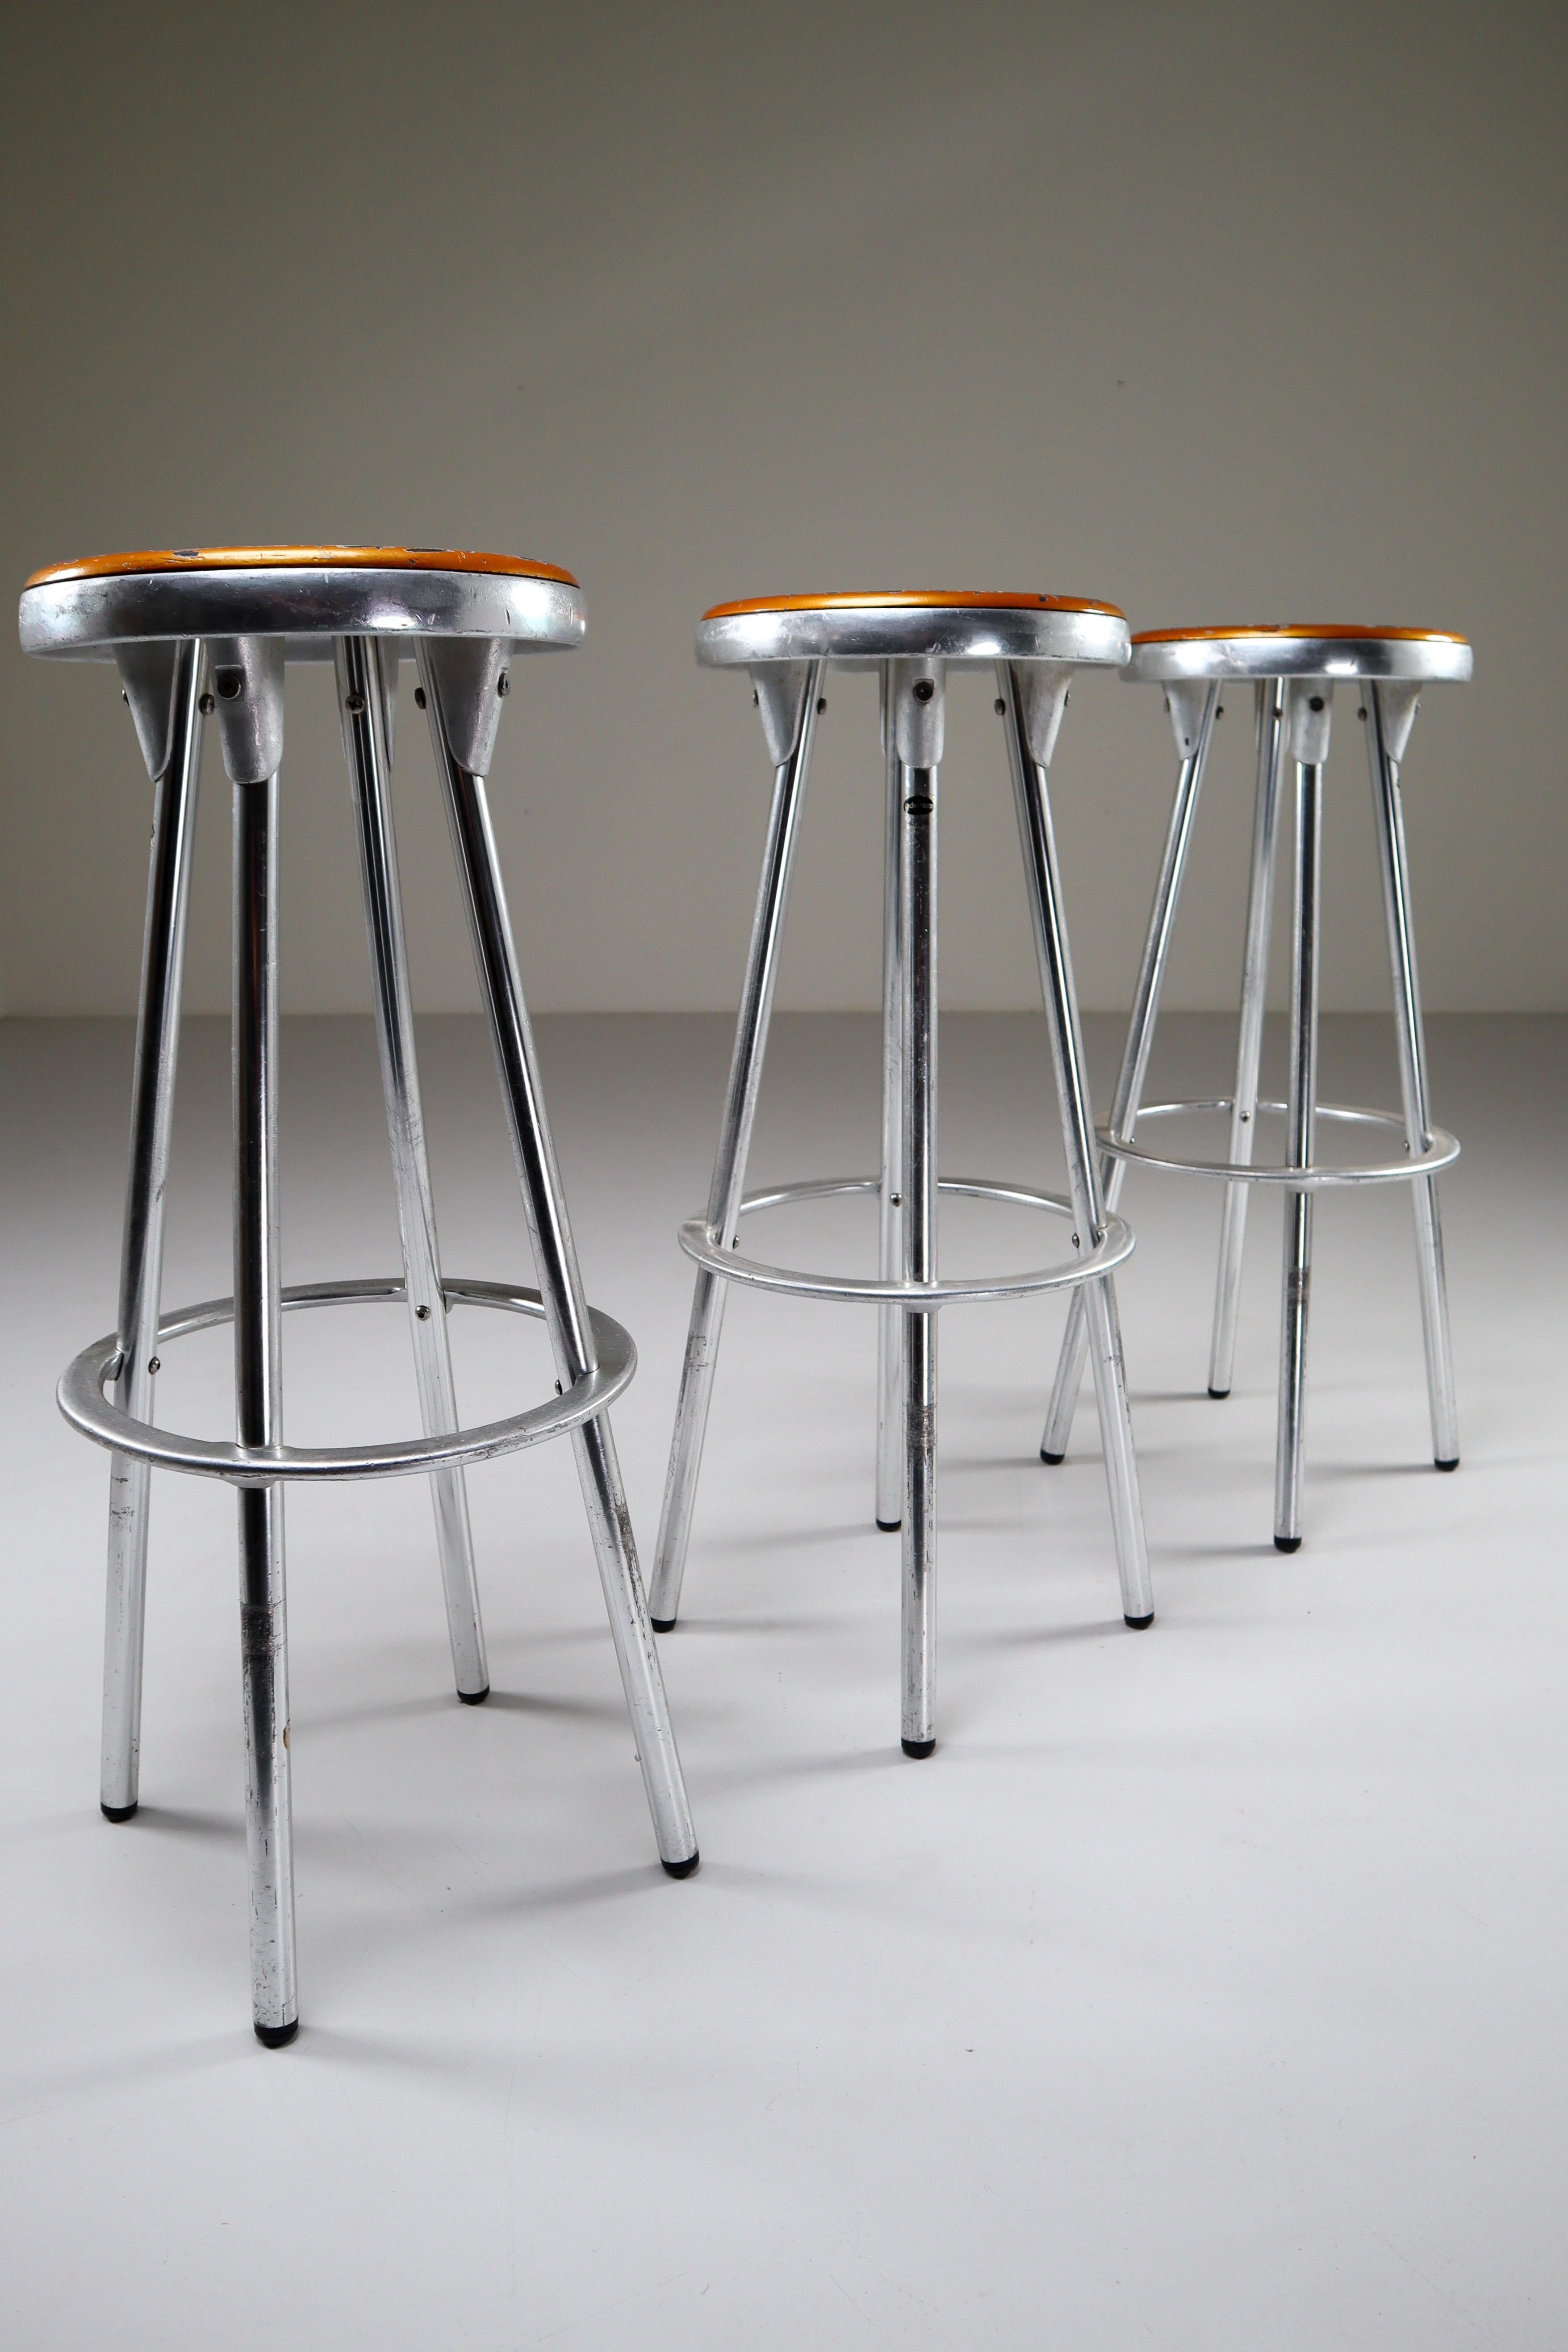 20th Century 3 Industrial Bar Stools in Aluminum by Joan Casas Y Ortinez for Indecasa Spain